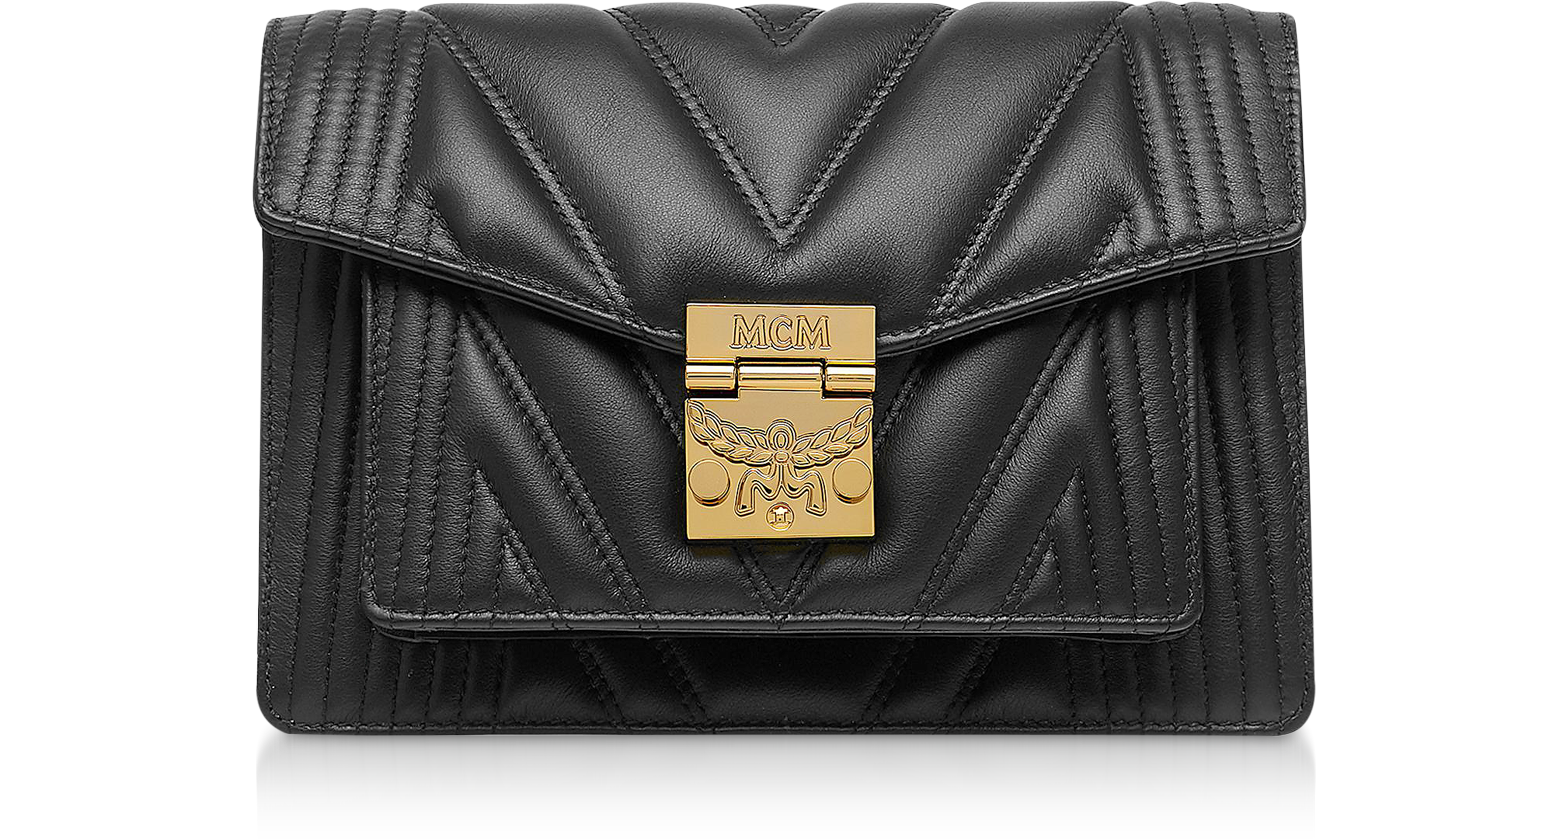 MCM Black Quilted Leather Patricia Crossbody Bag at FORZIERI